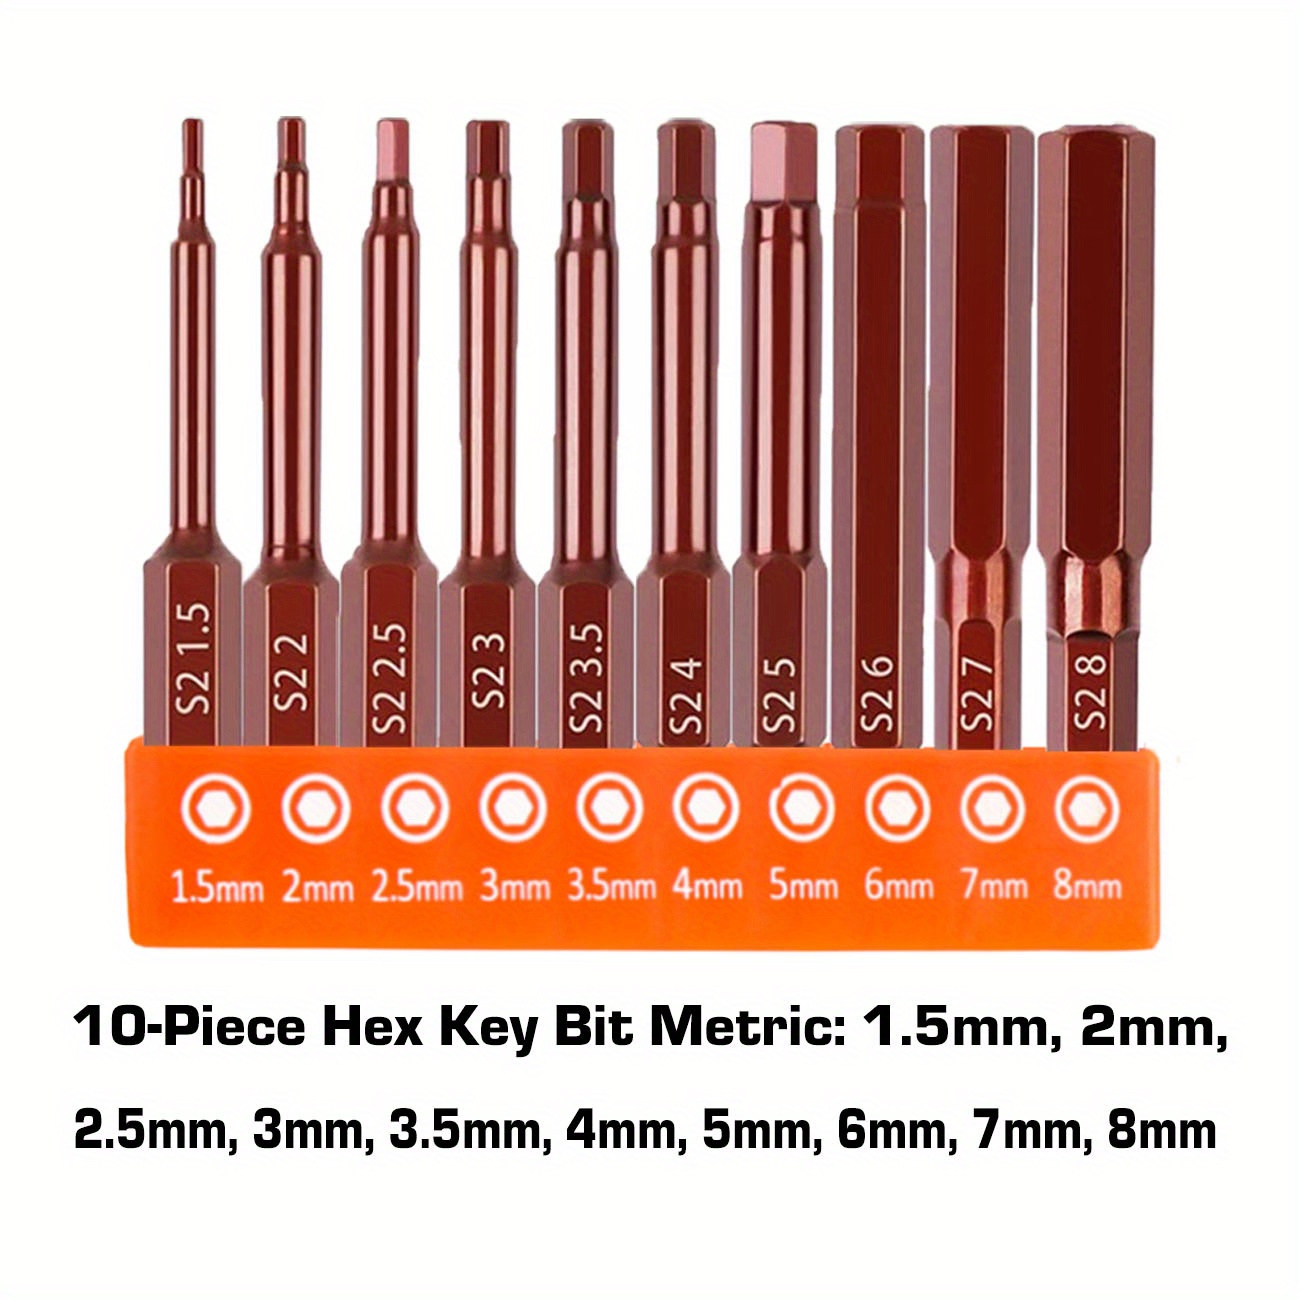 ALWORKKIT 38-Piece Tamper-Proof Torx Bit Set, Hex Head Allen Wrench Drill Bit Set, Strong Magnetic Extension Socket, 1/4 inch Metric and SAE S2 Steel